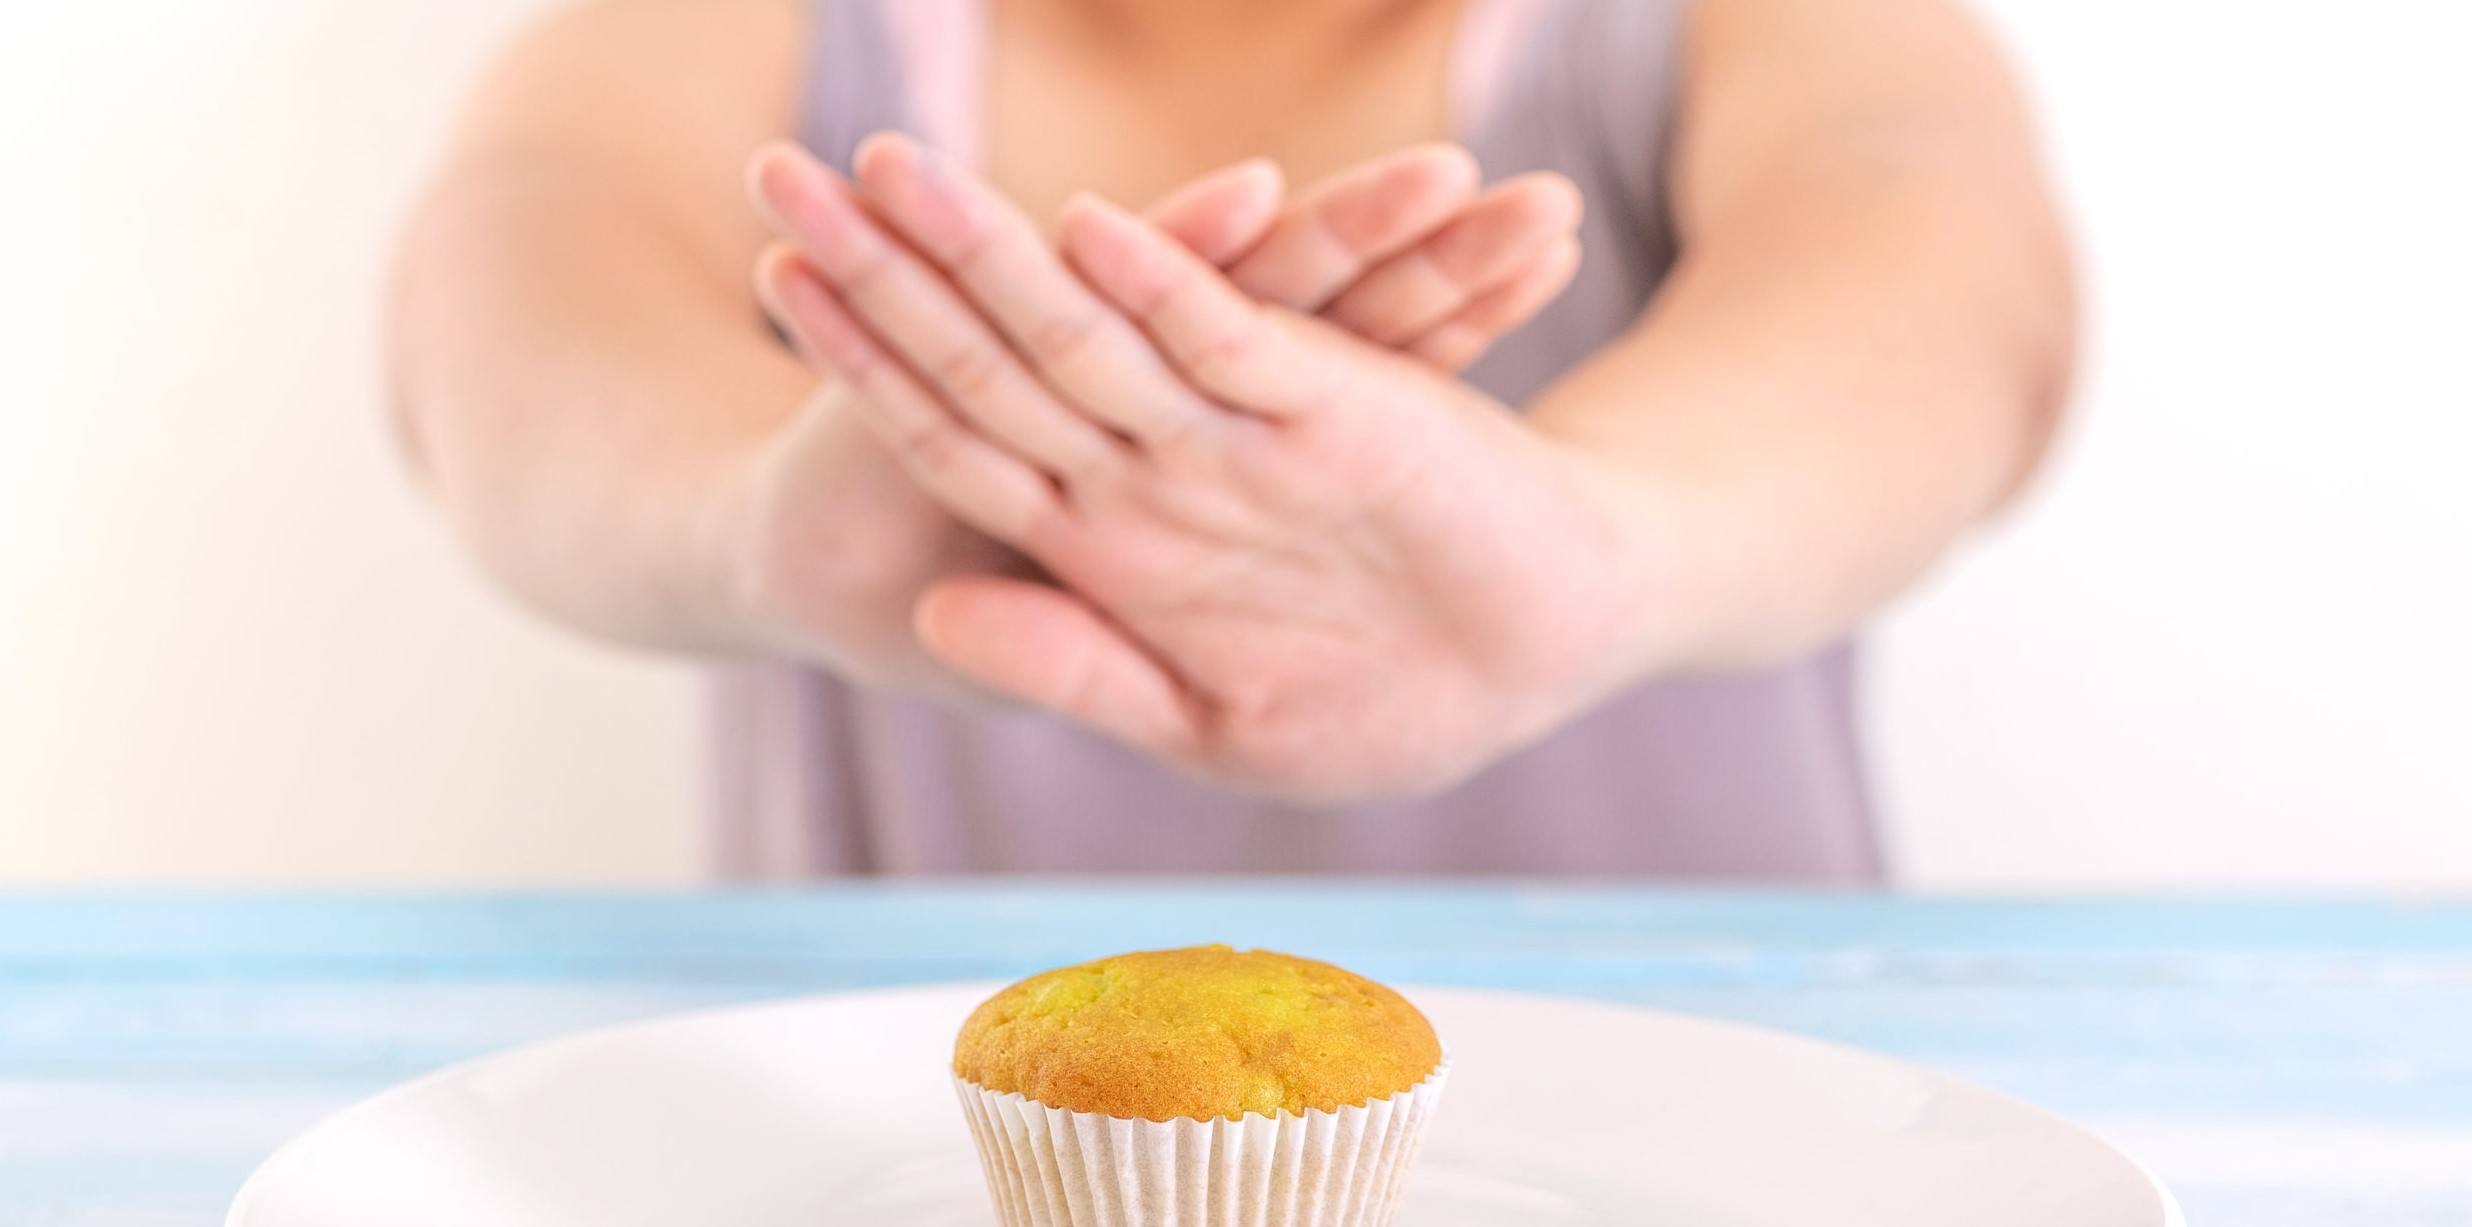 A fasting woman not eating a cupcake